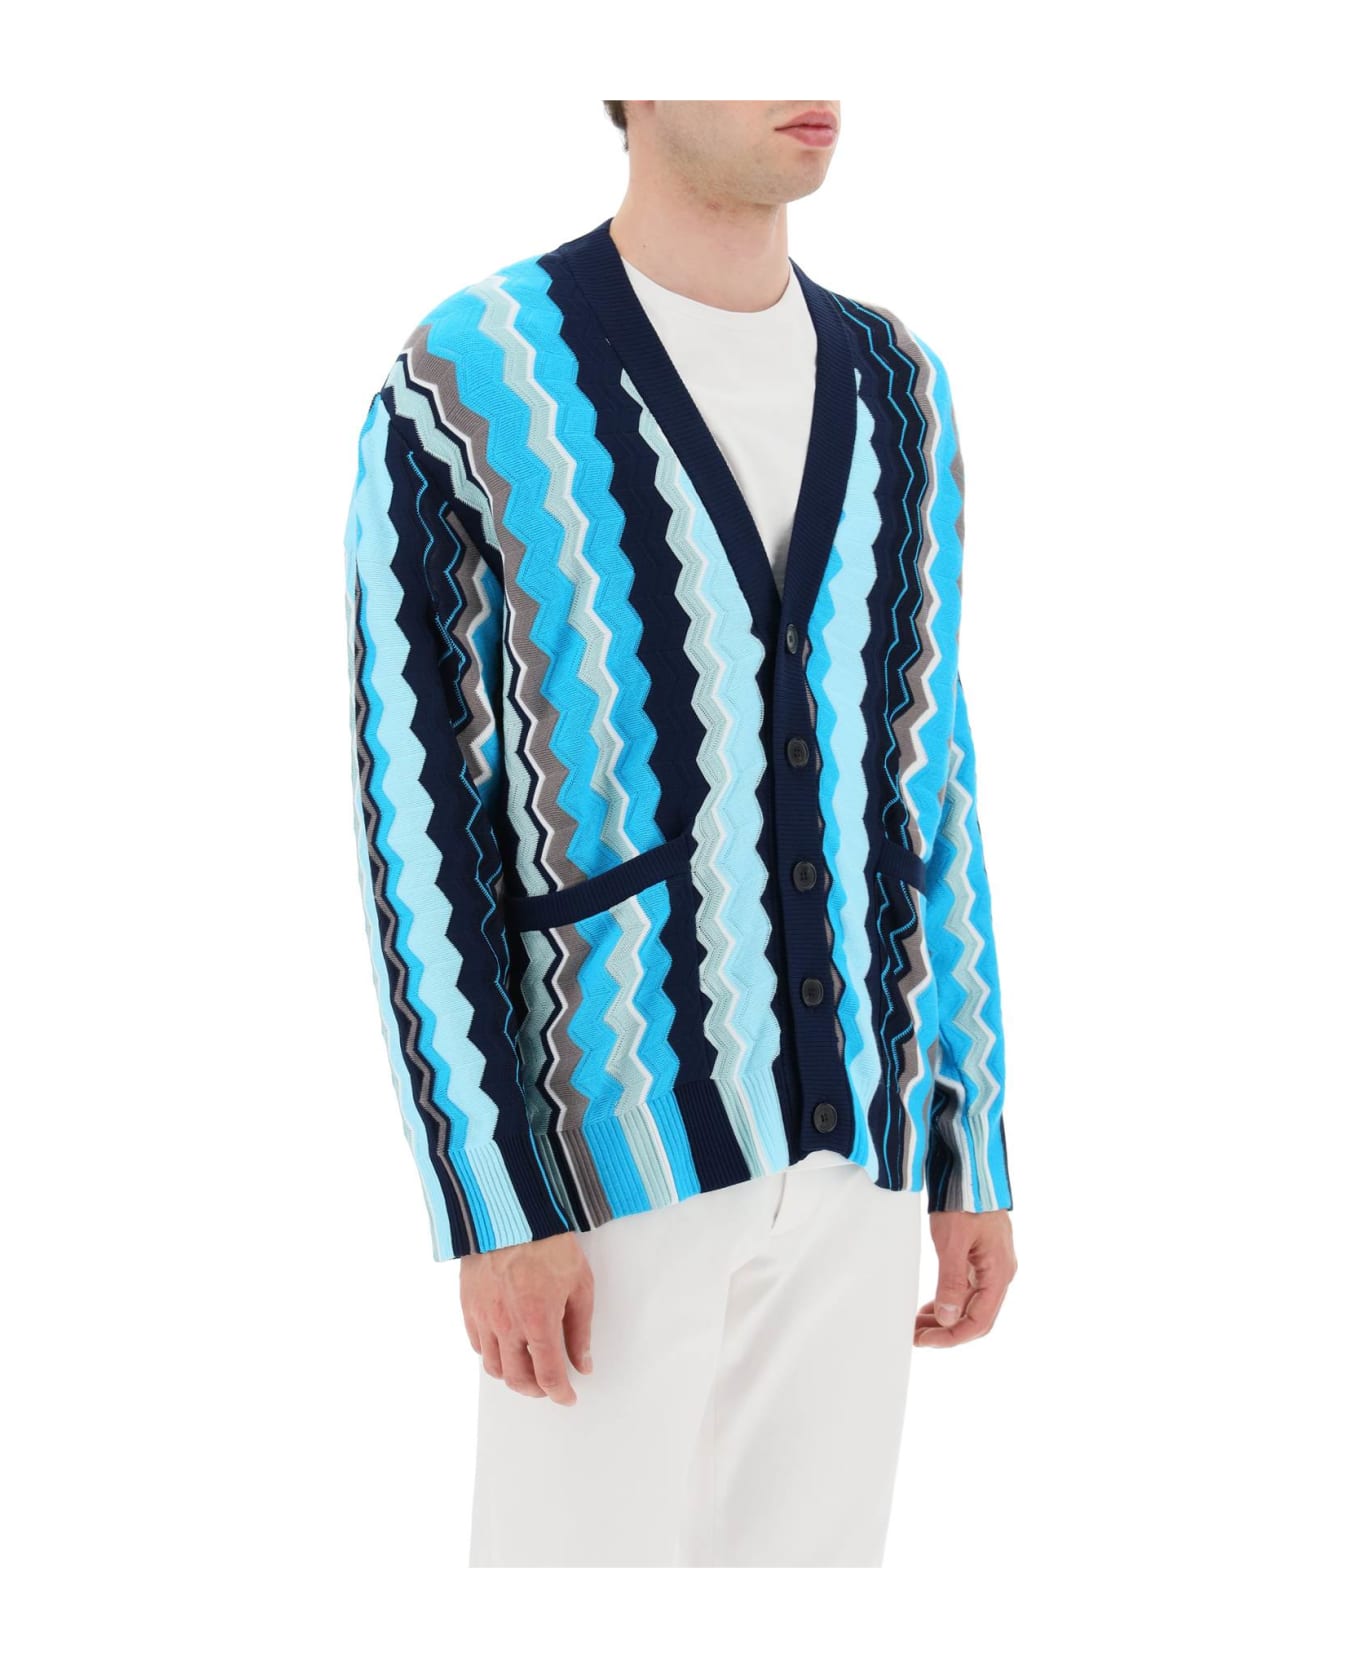 Missoni Patterned Cardigan - WHITE AND BLUE TONES (Blue)